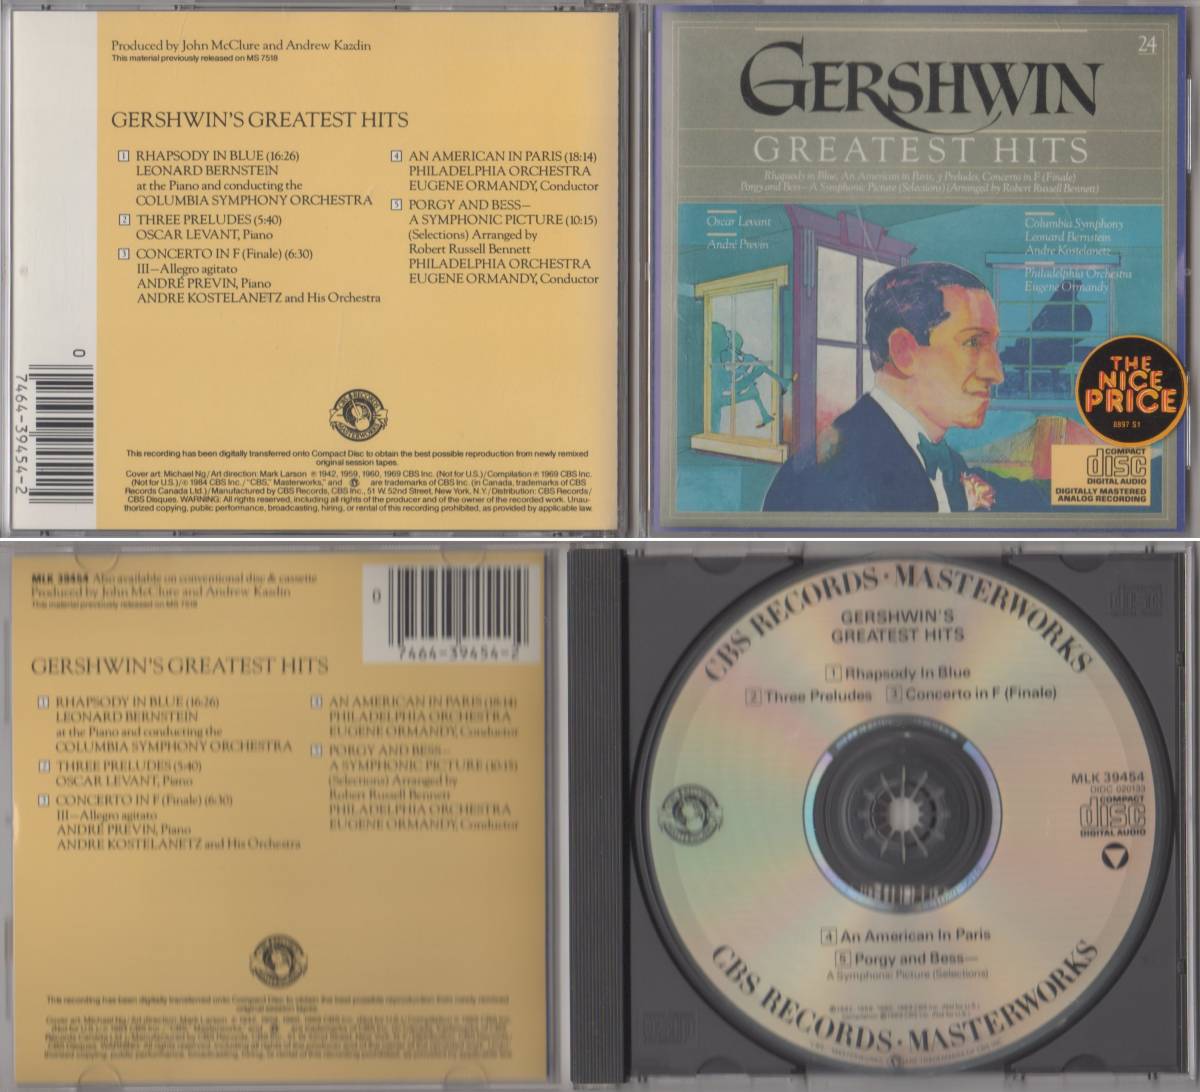 CD3枚 A TRIBUTE TO GEORGE GERSHWIN BY THE ENTERTAINERS & CAPITOL SINGS GERSHWIN (+GERSHWIN'S GREATEST HITS)_クラシックCD GERSHWIN S GREATEST HITS